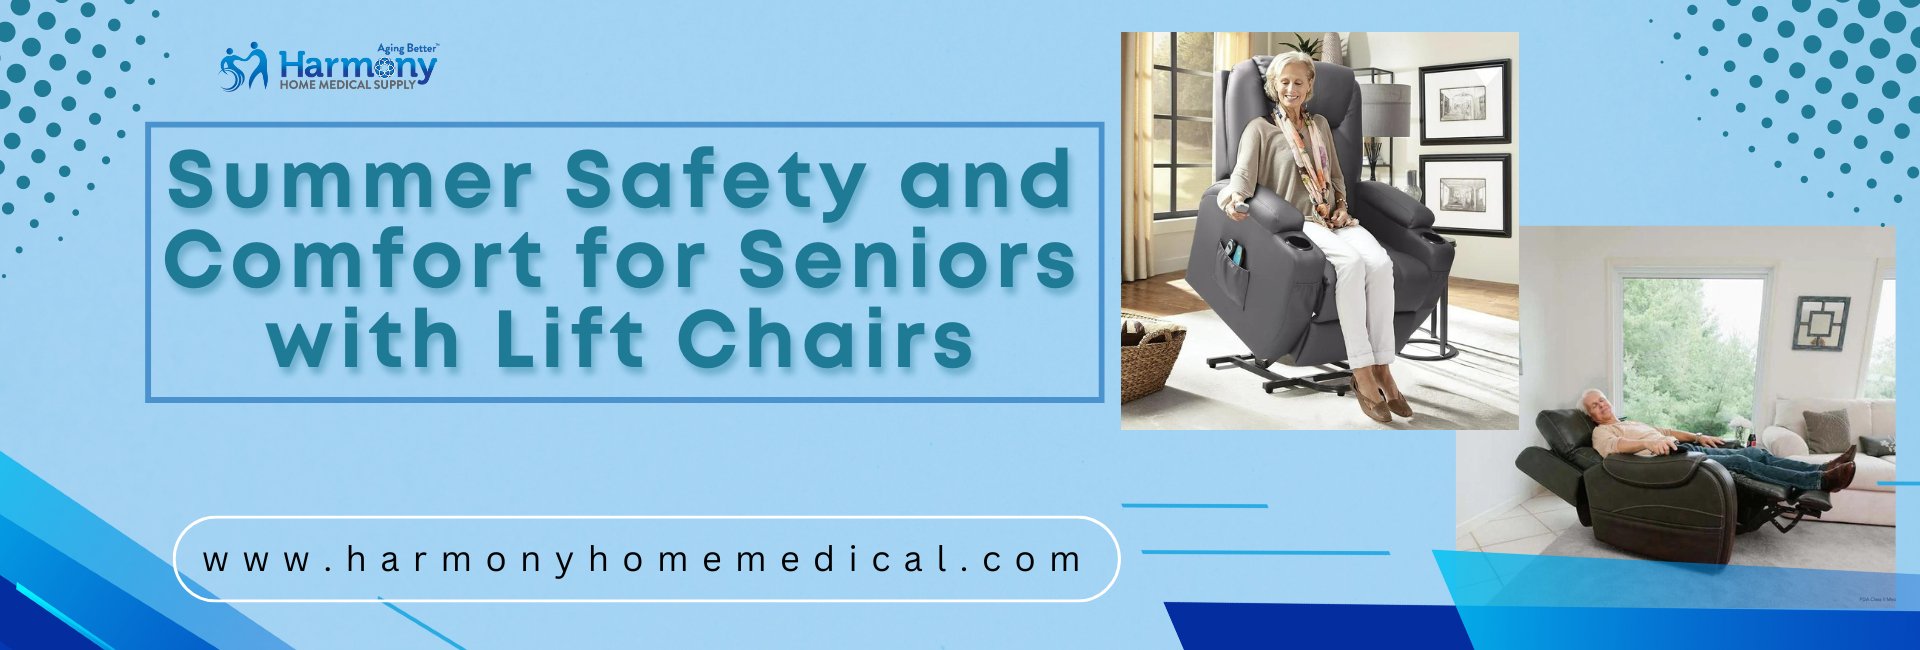 Summer Safety and Comfort for Seniors with Lift Chairs